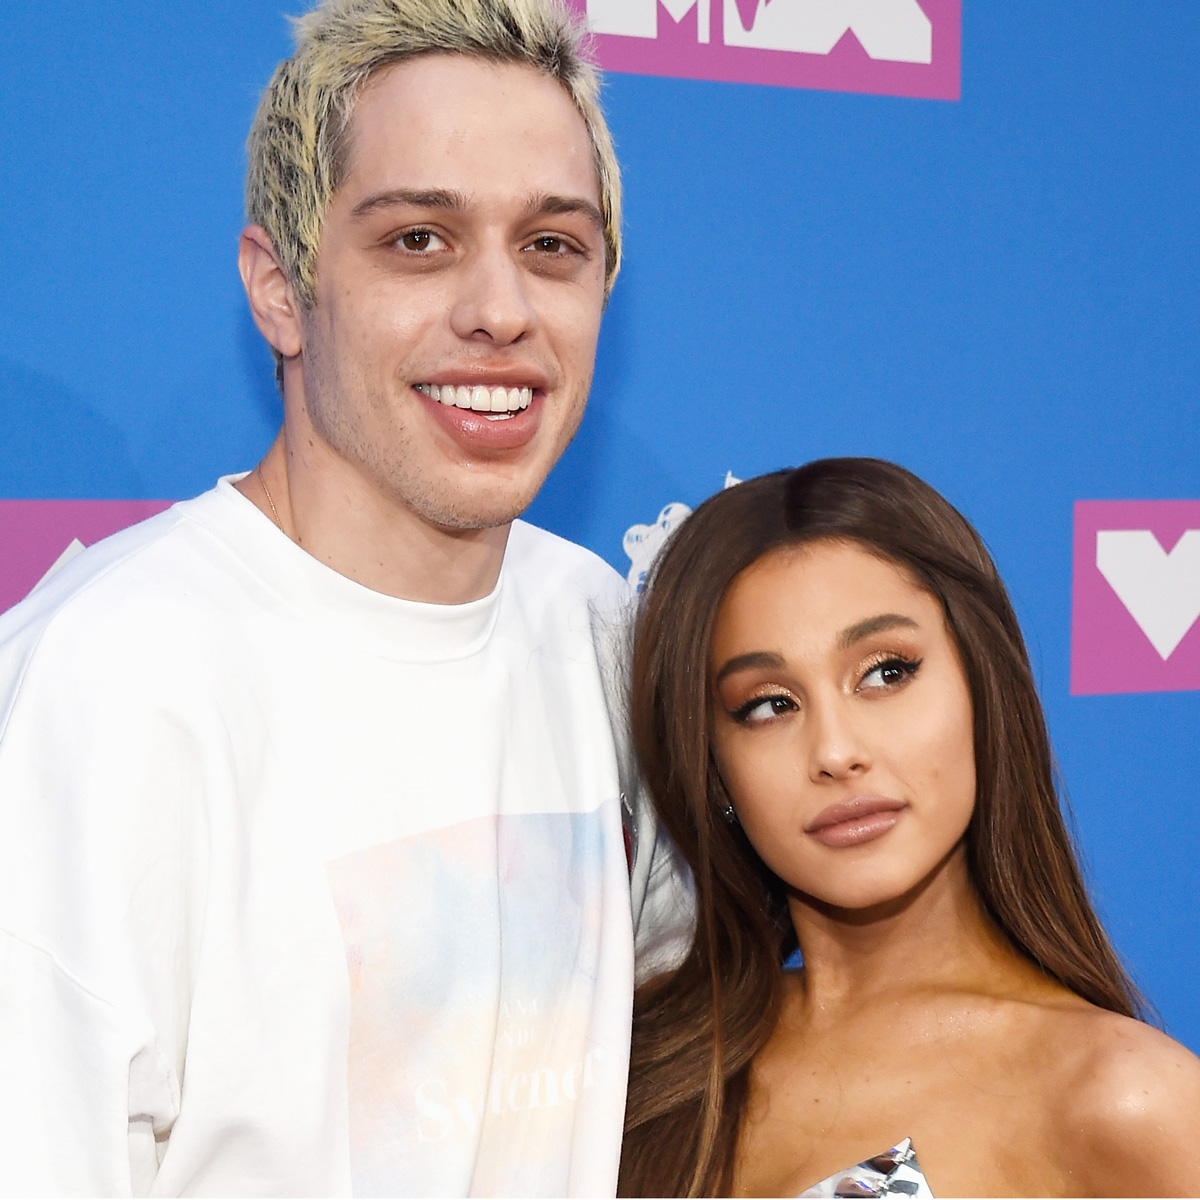 Pete Davidson and Ariana Grande split: what happens to the ring? - Vox